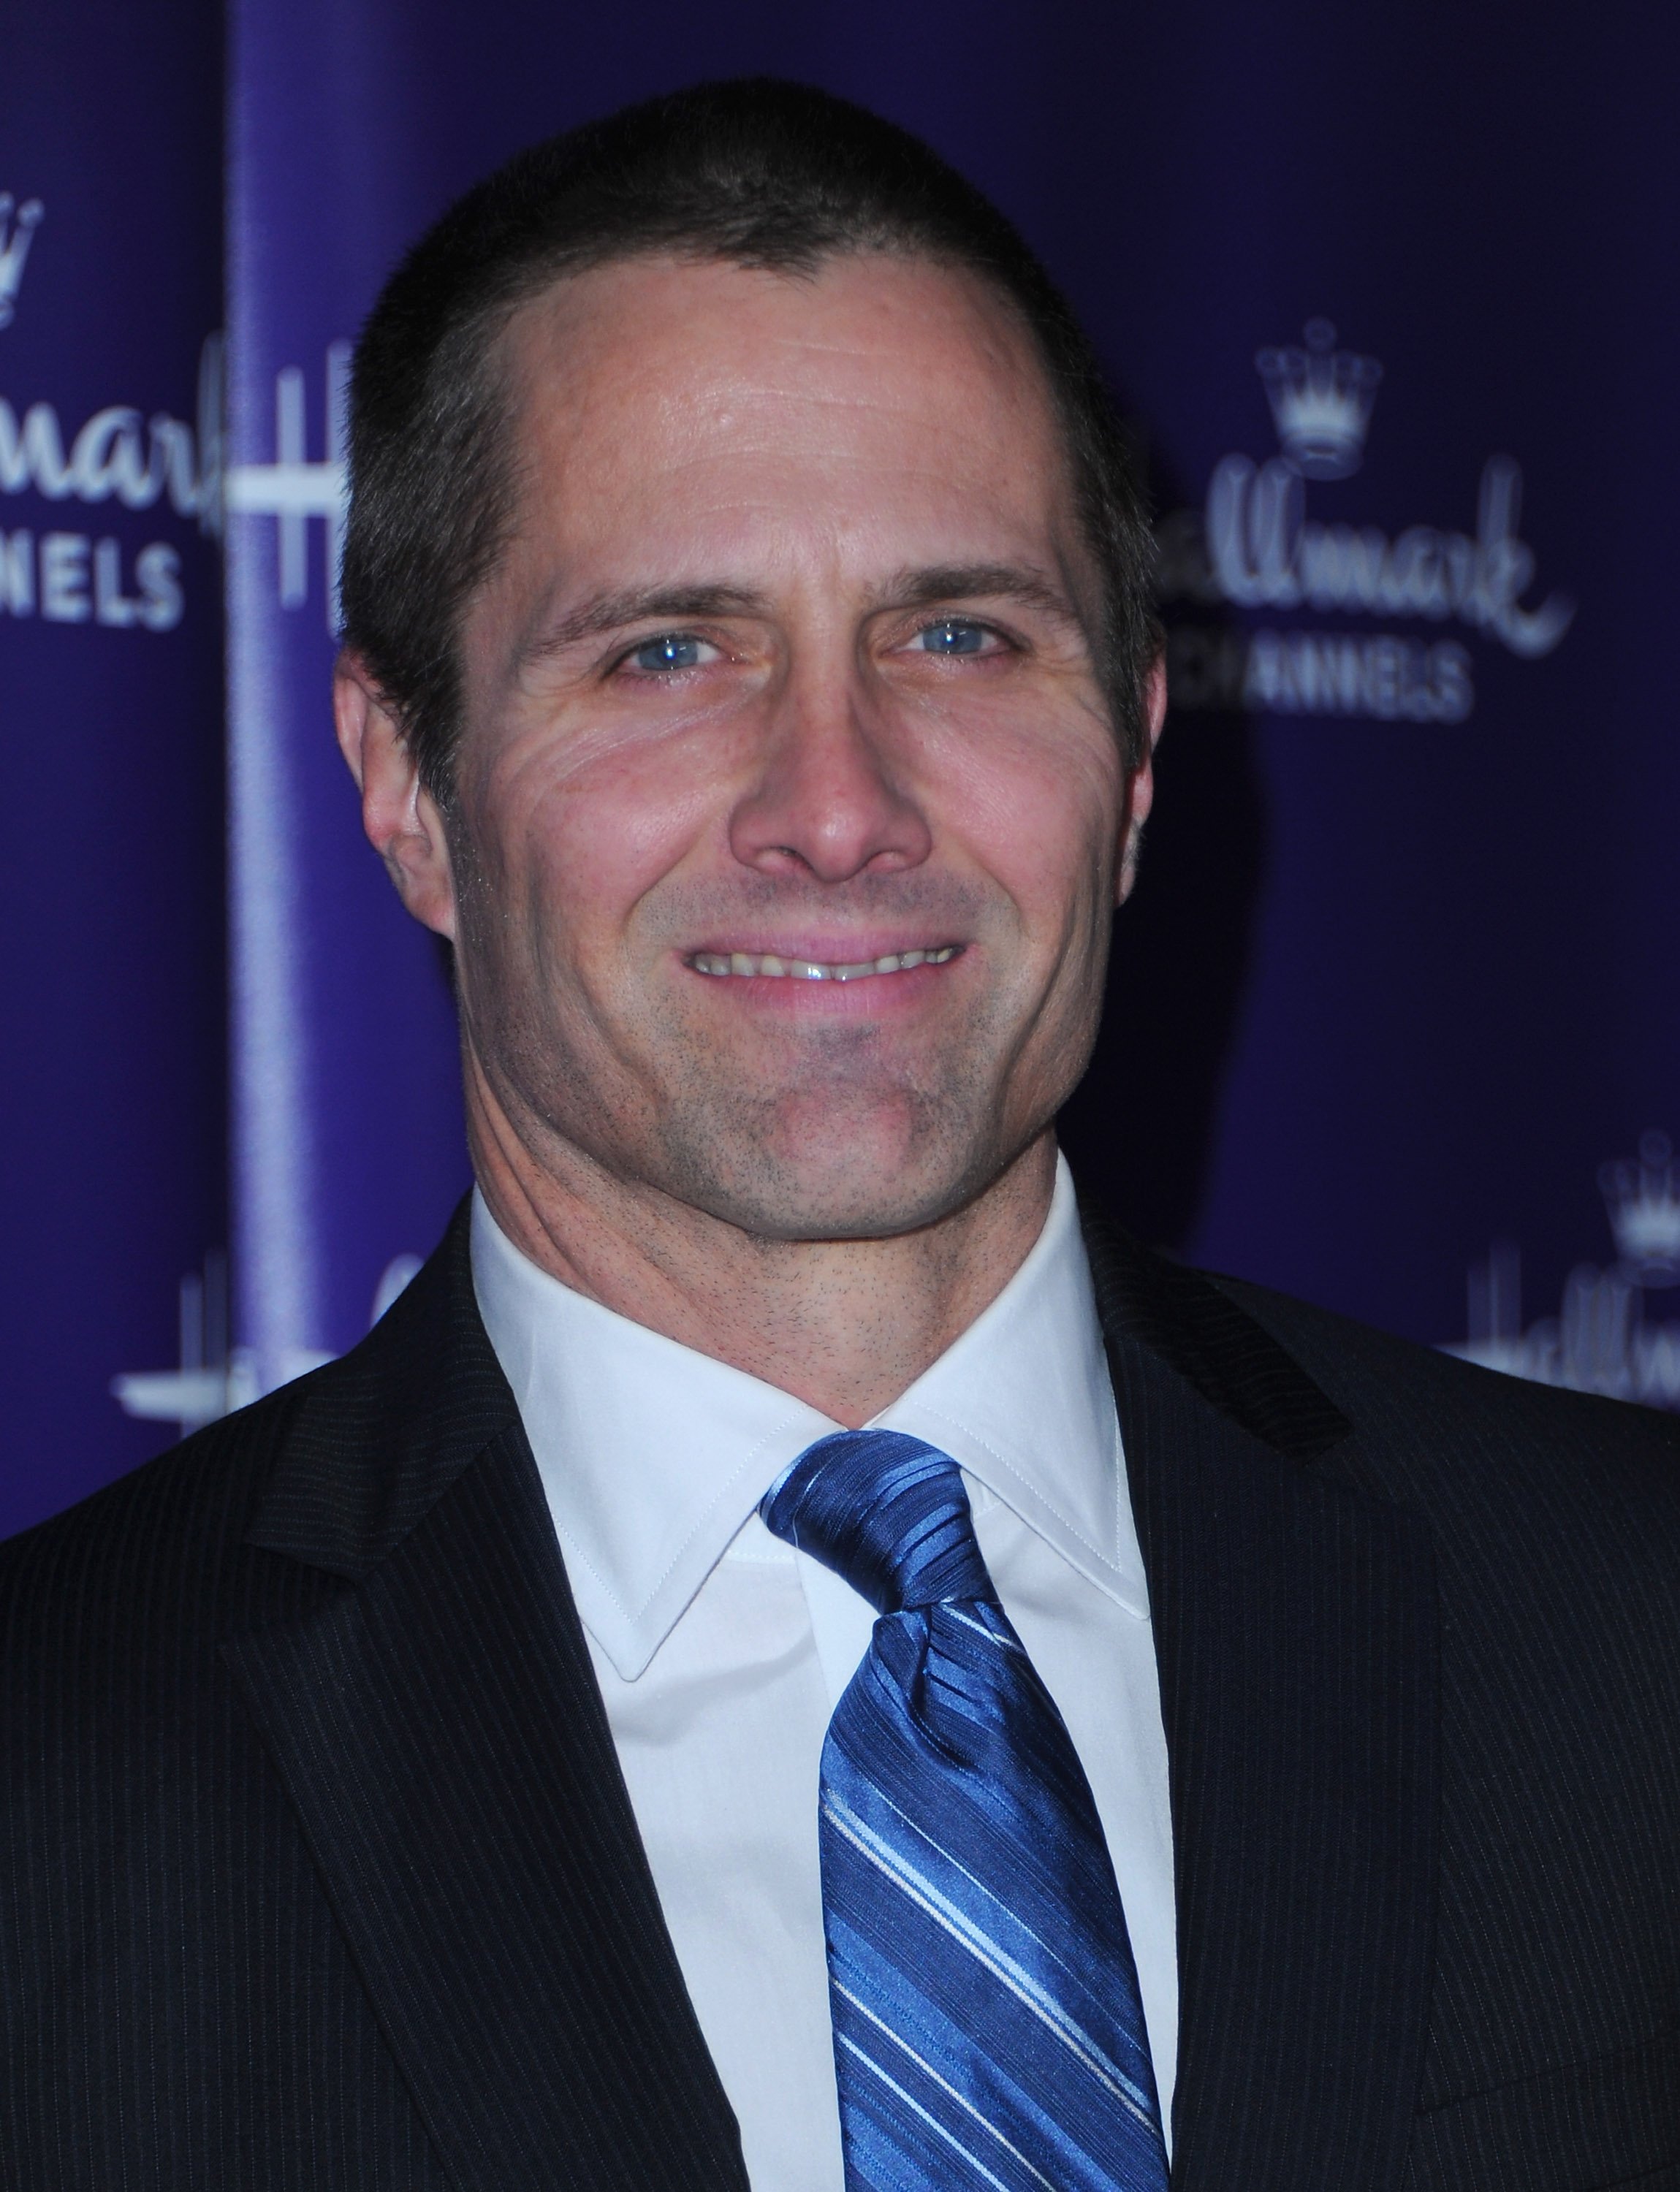 Rob Estes arrives to Hallmark Channel's 2011 TCA Winter Tour Evening Gala on January 7, 2011, in Pasadena, California. | Source: Getty Images.